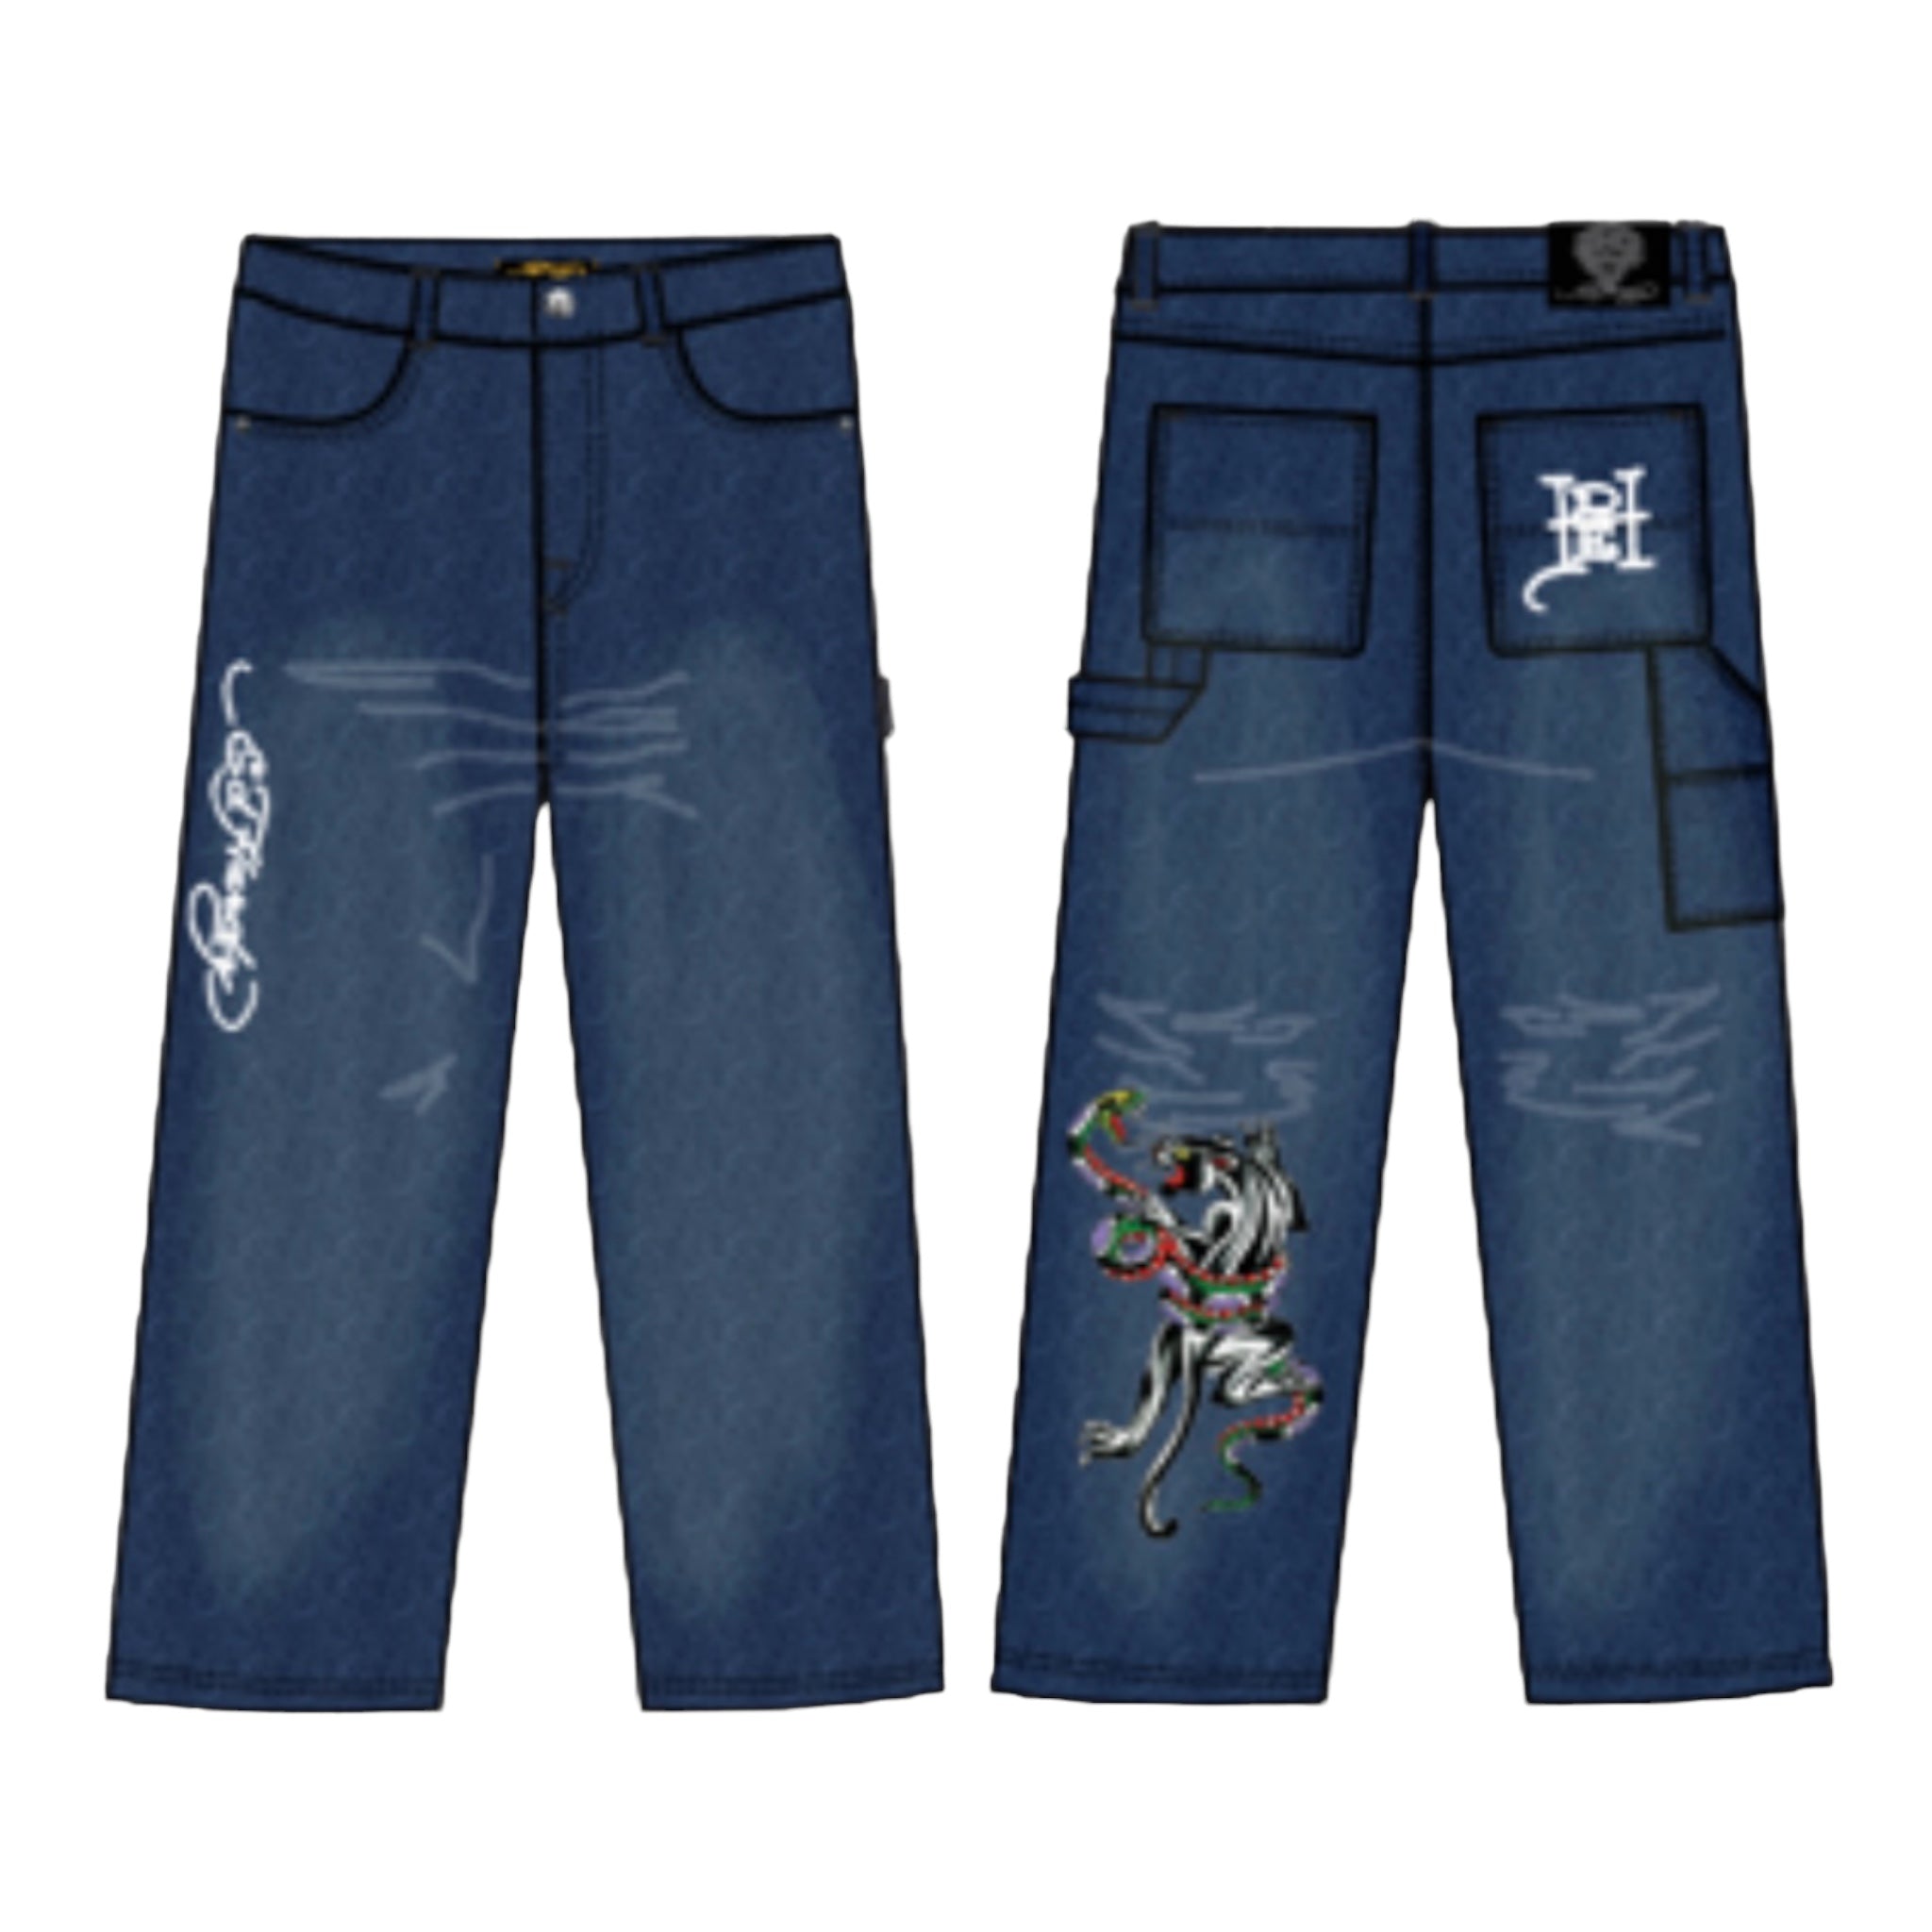 Snake & Panther Capenter  DENIM TROUSERS JEANS  Indigo - Ed Hardy